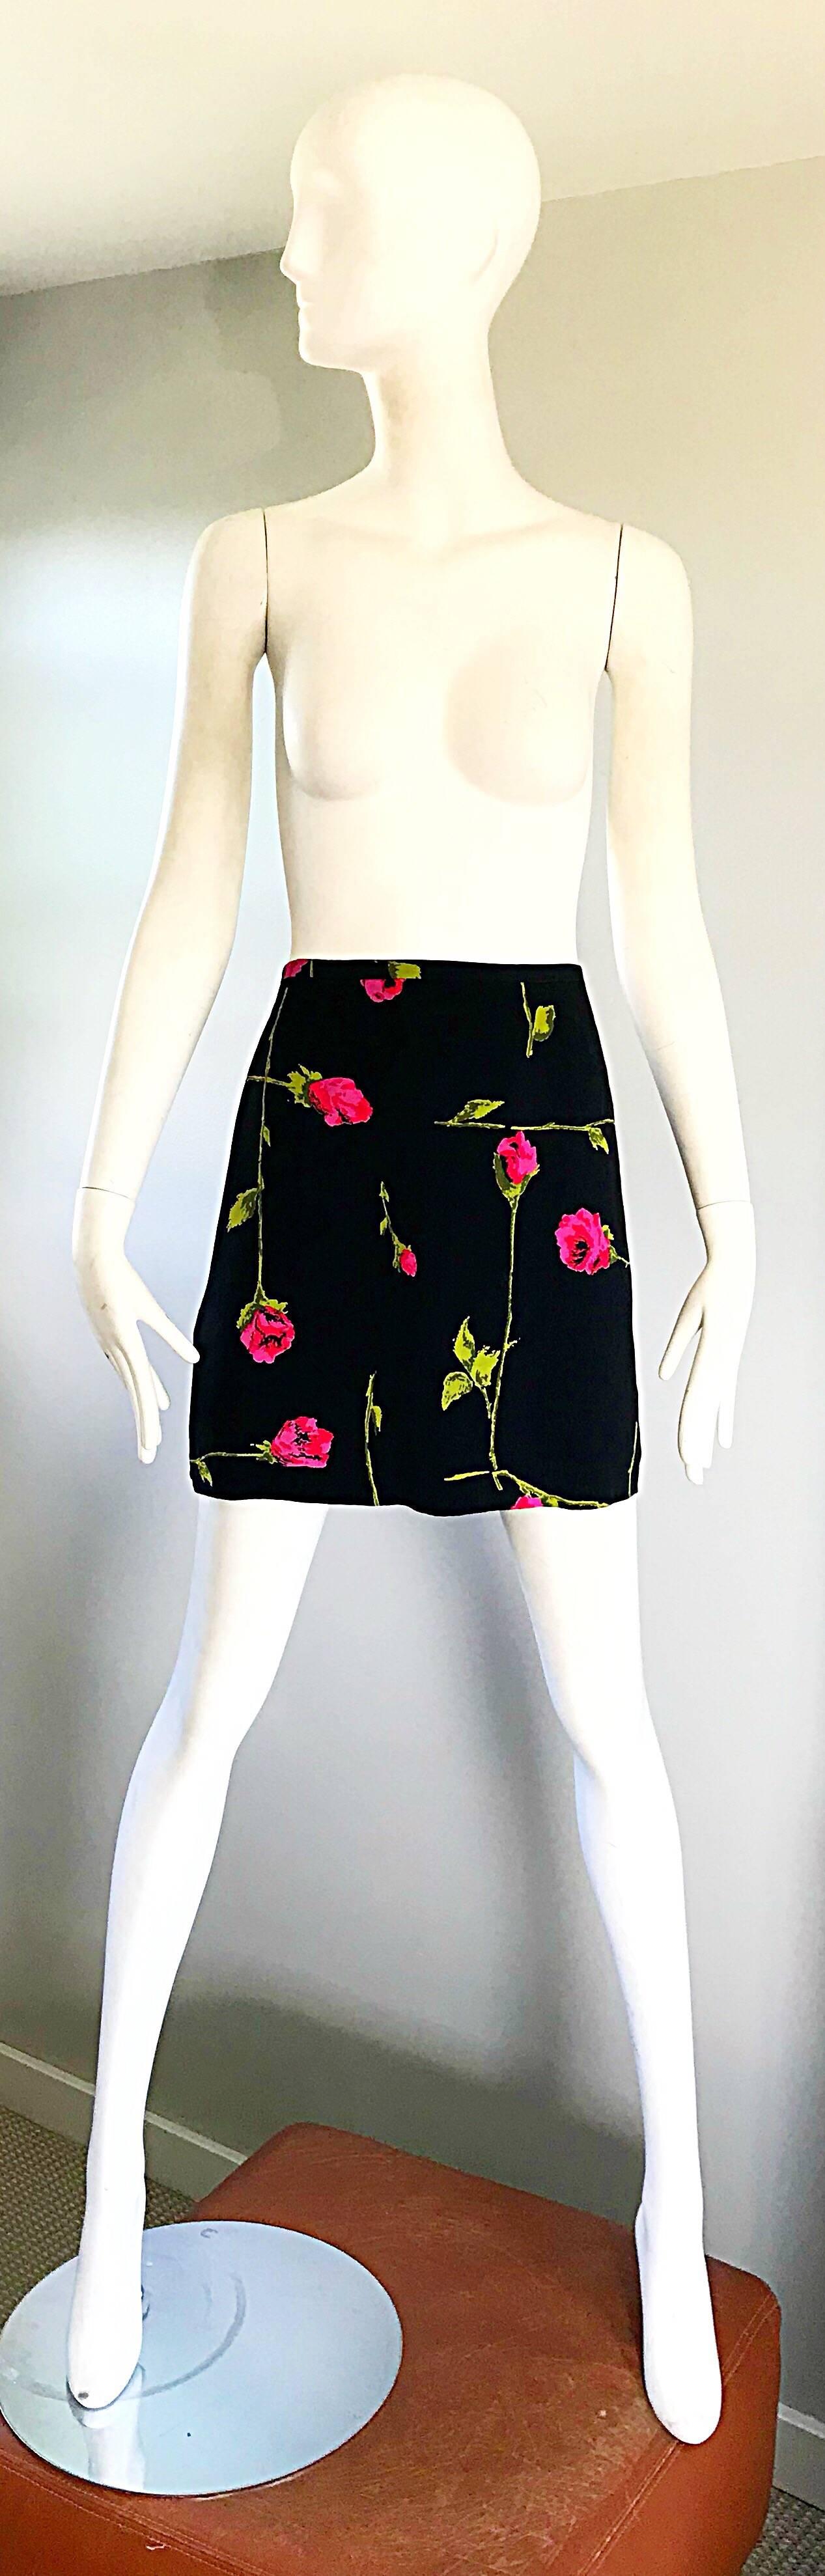 Early 1990s BETSEY JOHNSON black, hot pink and green rose print rayon low rise mini skirt! Features asymmetrical rose prints in different sizes throughout. Fully lined, with hidden side zipper with hook-and-eye closure. Can easily be dressed up or